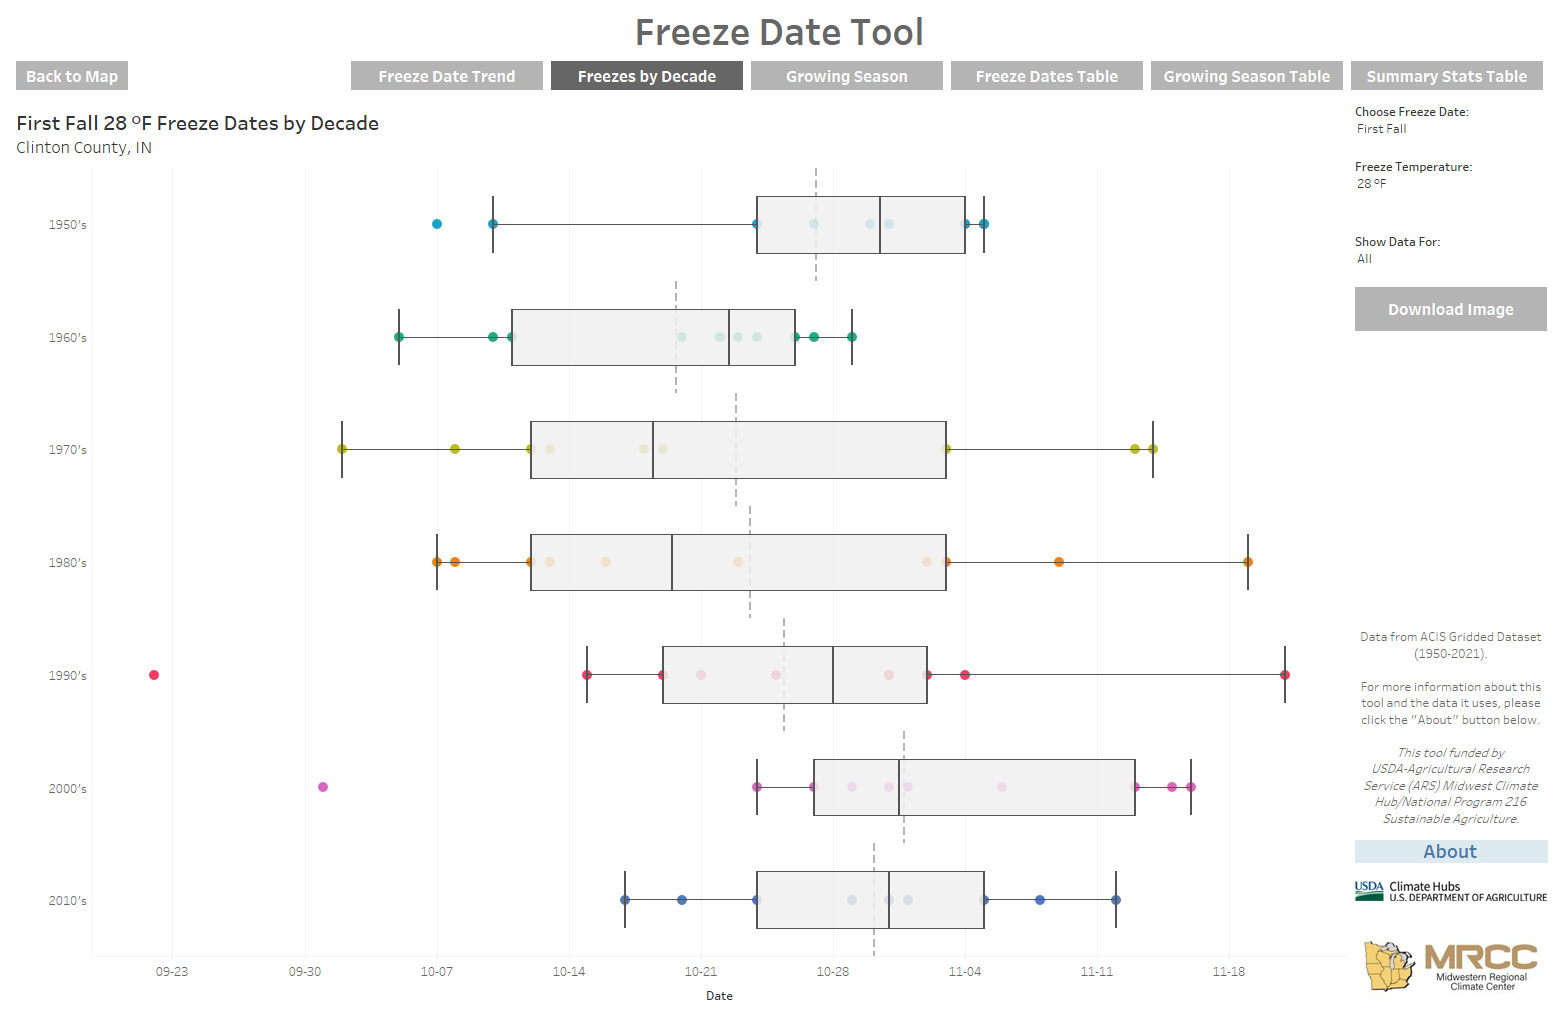 Figure 2. Example product from the MRCC’s Freeze Date Tool that shows the variability and range of date for the first fall freeze in Clinton County, Indiana defined at 28 degrees Fahrenheit.